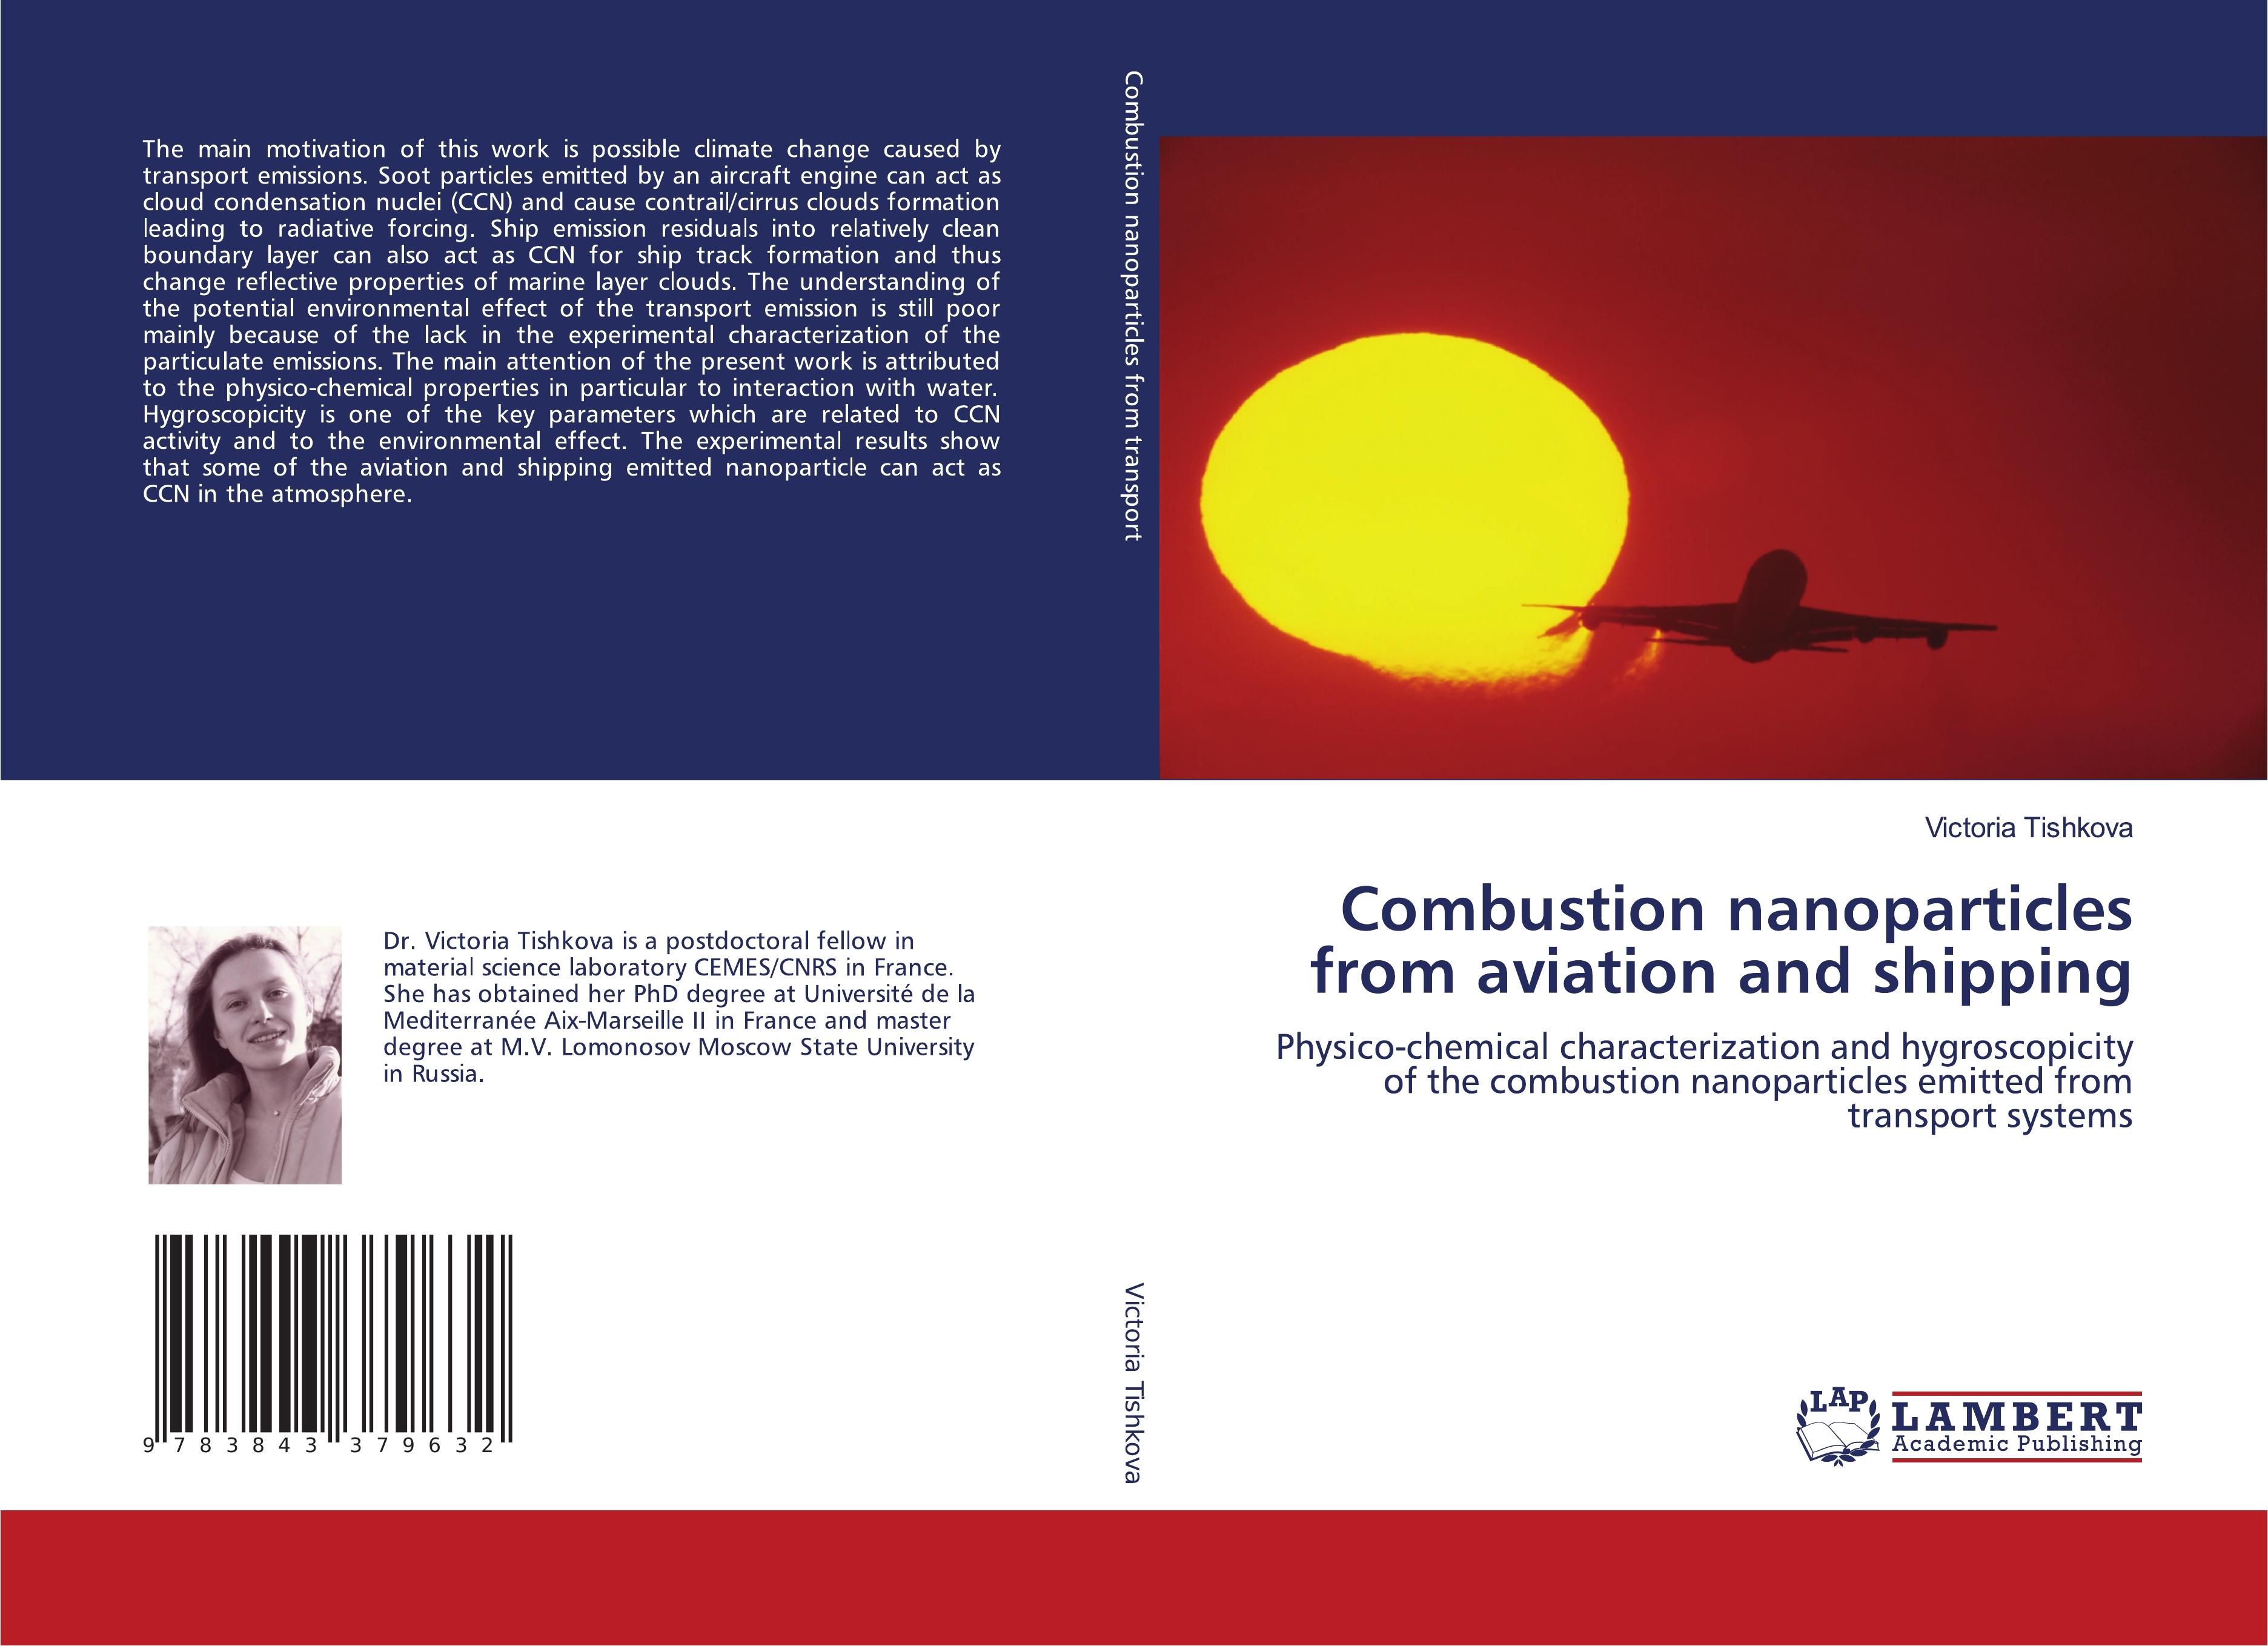 Combustion nanoparticles from aviation and shipping - Victoria Tishkova